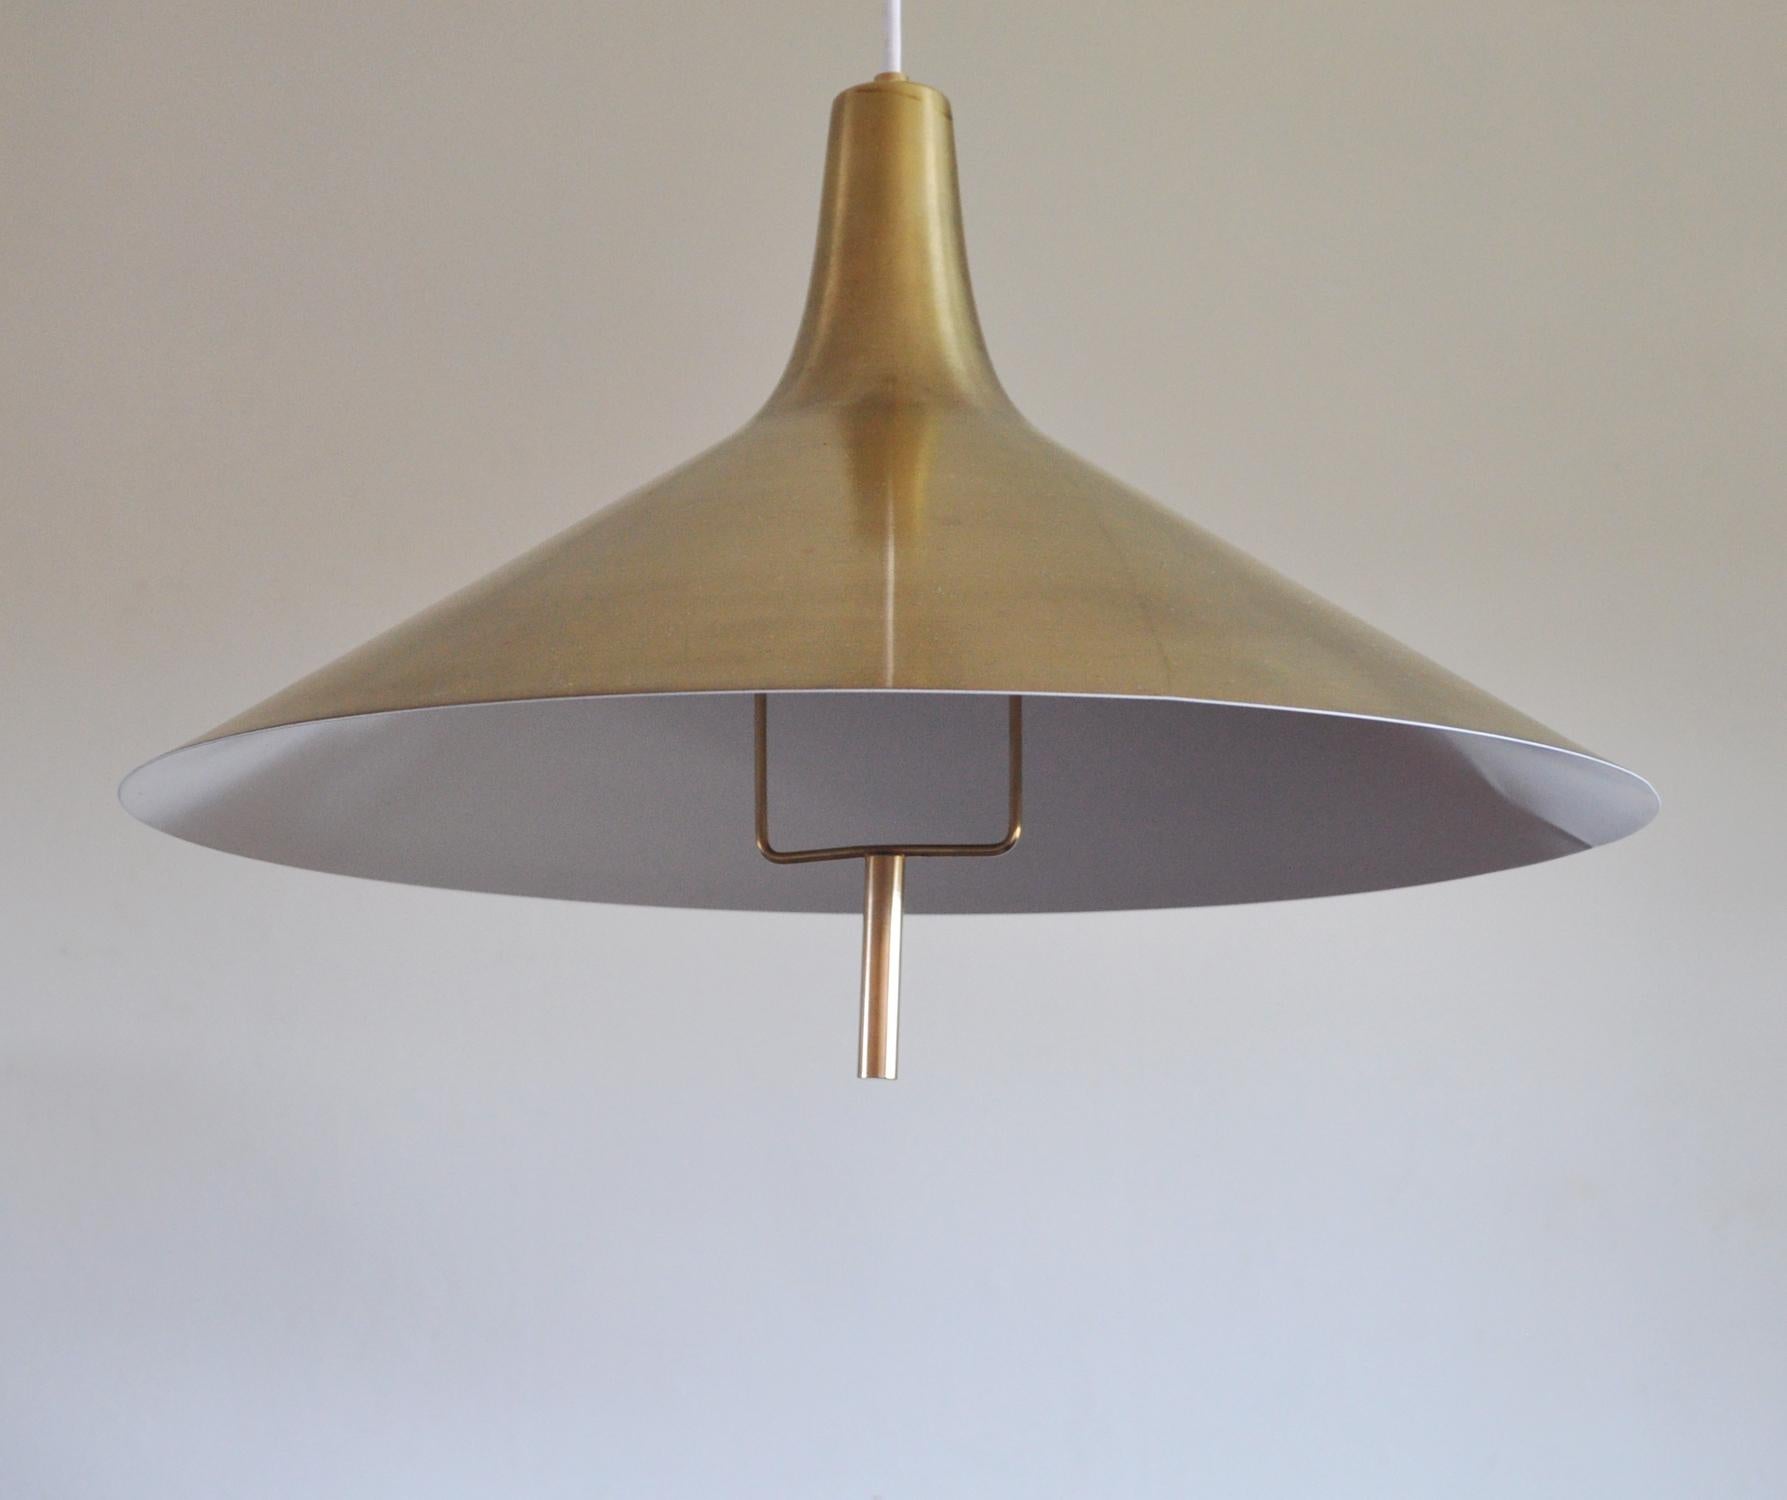 20th Century Danish Mid-century Modern Chandelier in Brass 1950s in the Style of Paavo Tynell For Sale